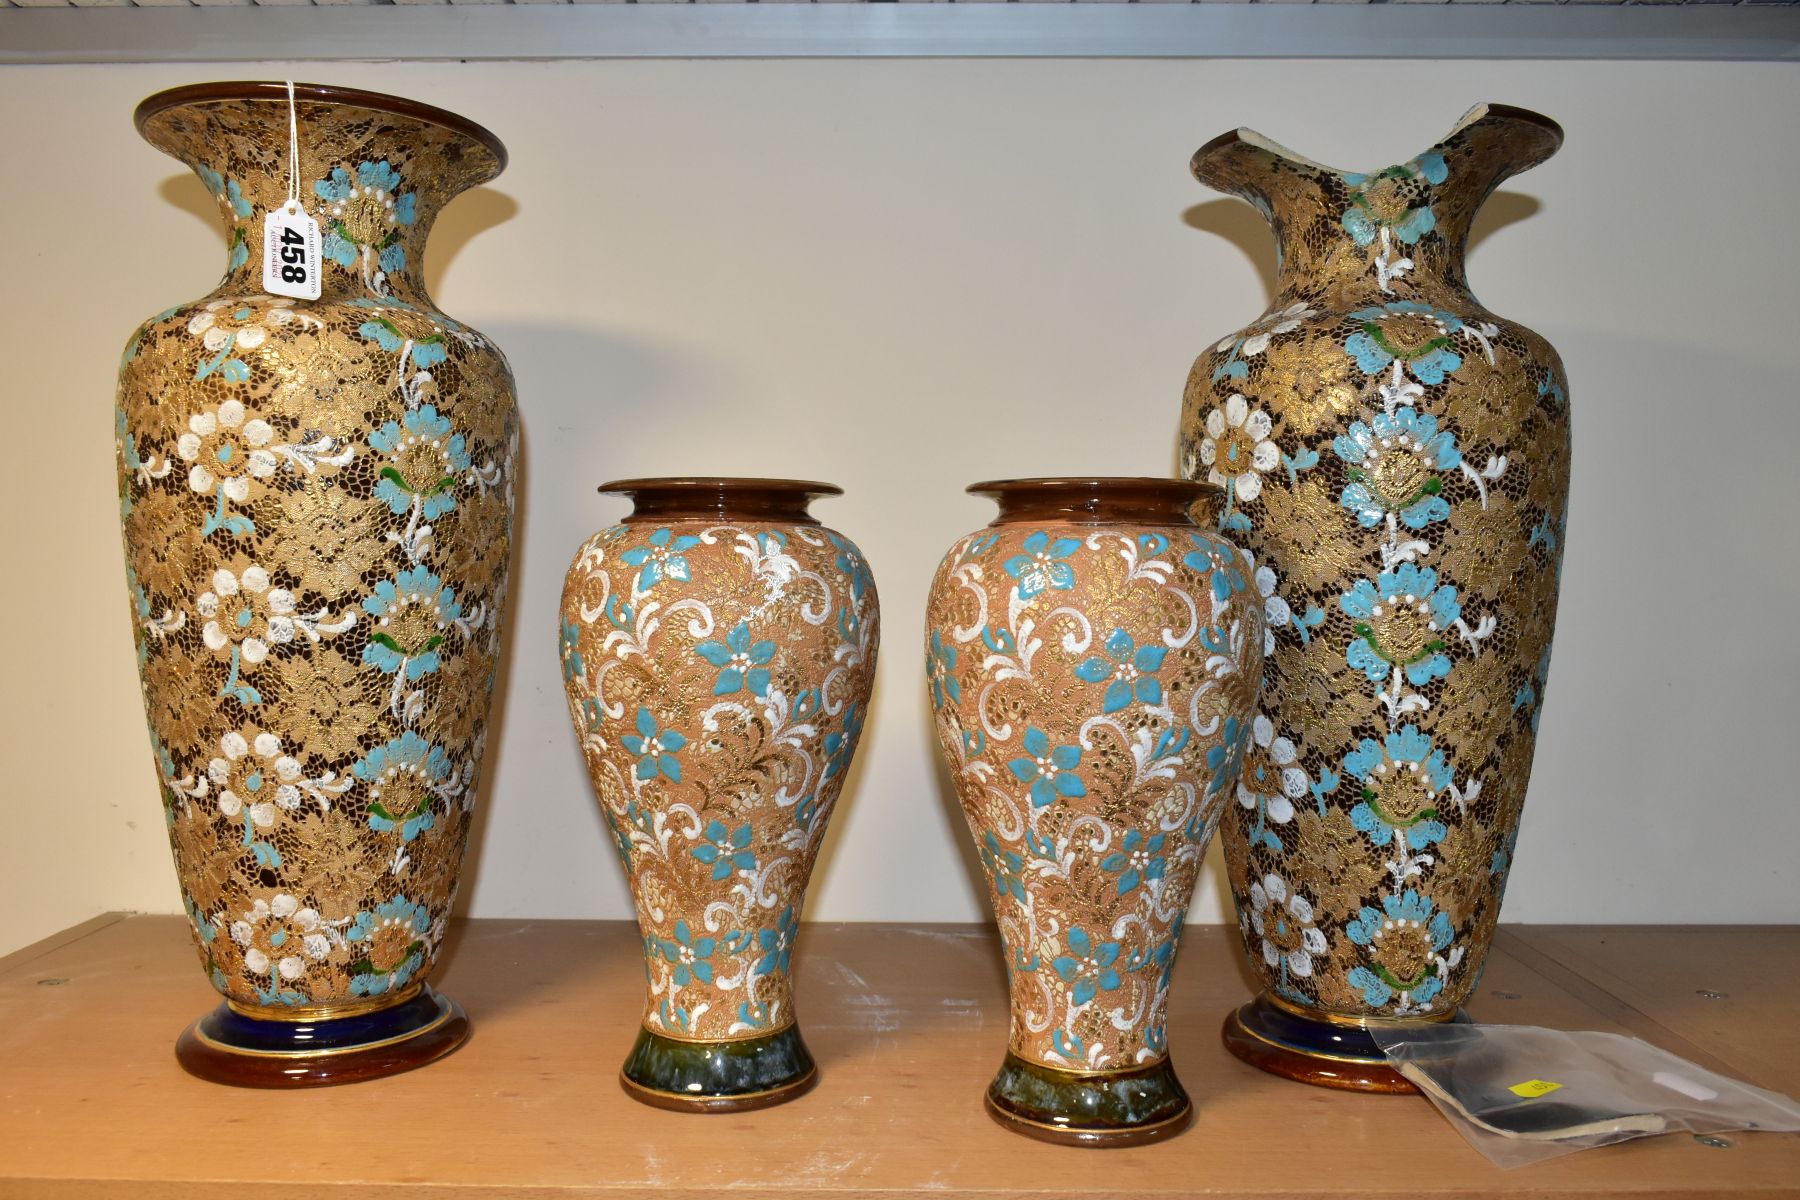 TWO PAIRS OF ROYAL DOULTON SLATERS PATENT BALUSTER VASES, the taller pair with flared rims, one with